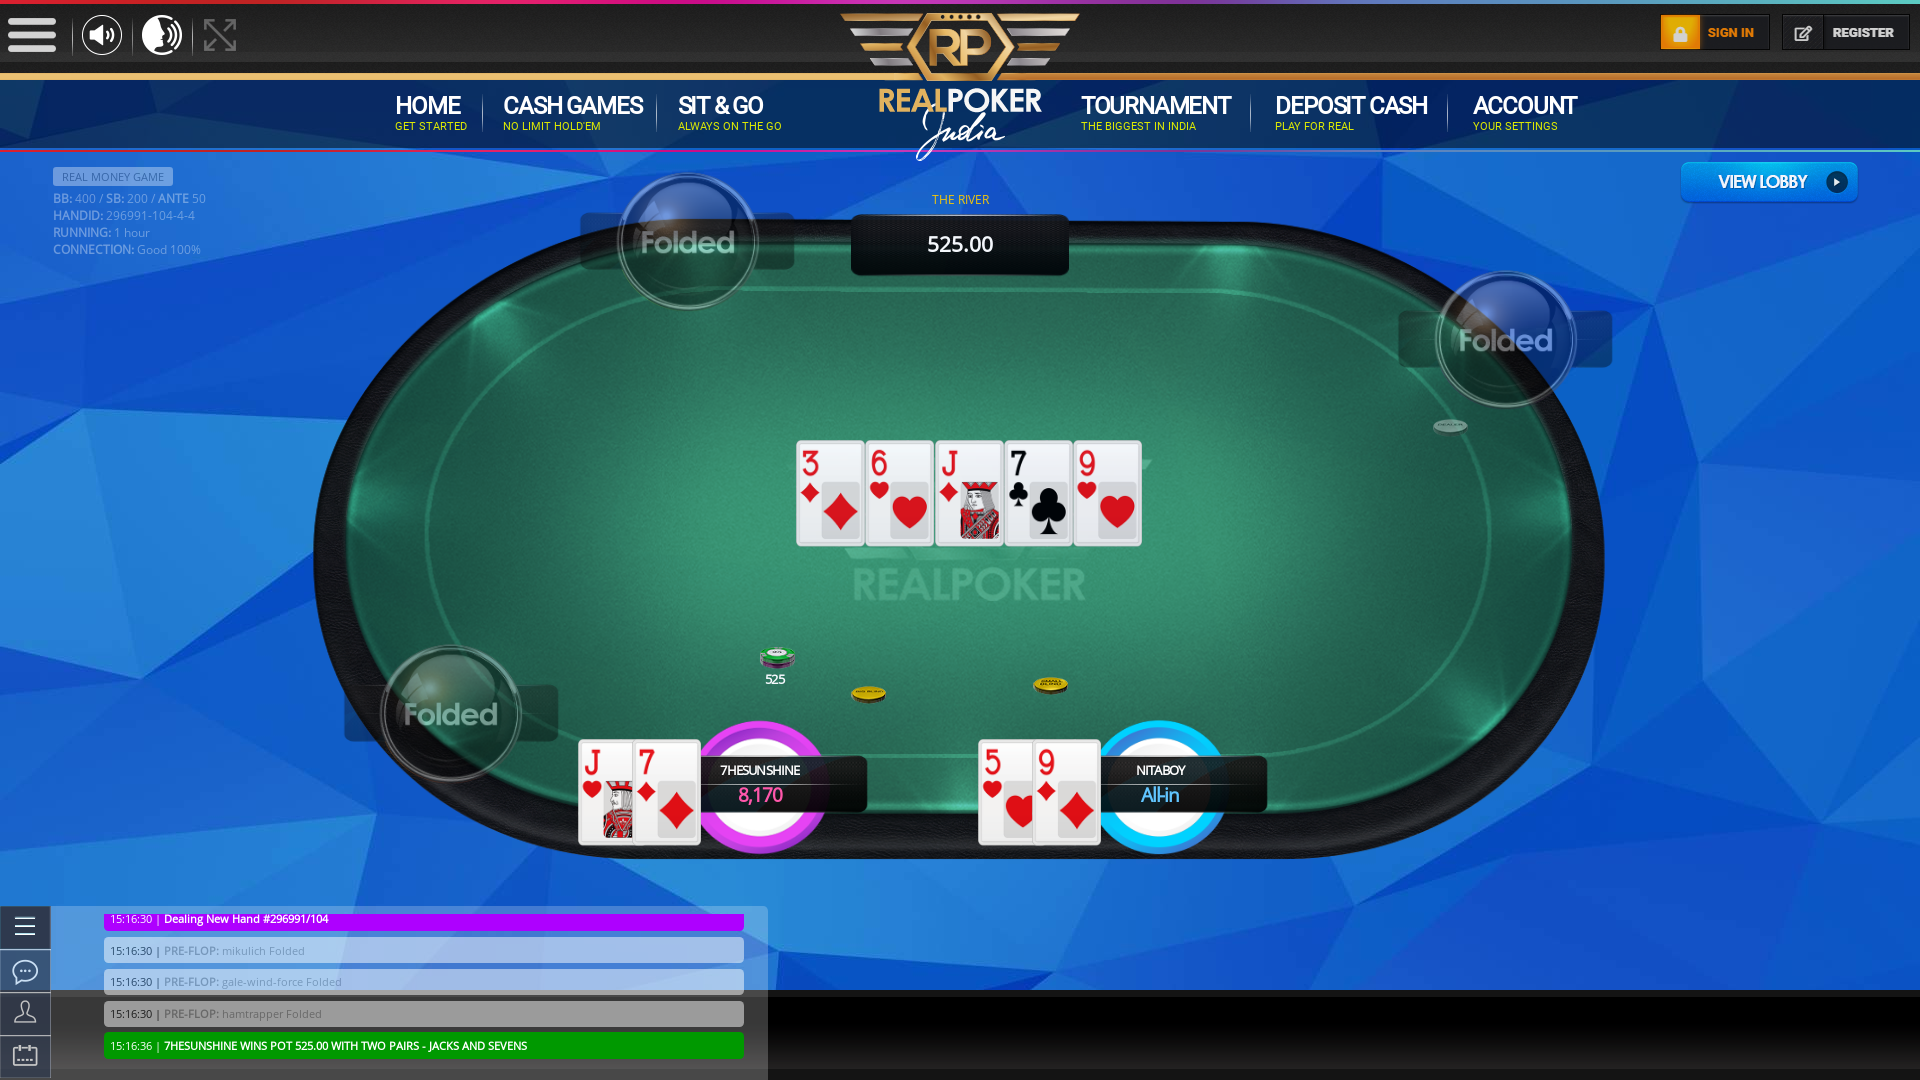 Real poker on a 10 player table in the 60th minute of the game